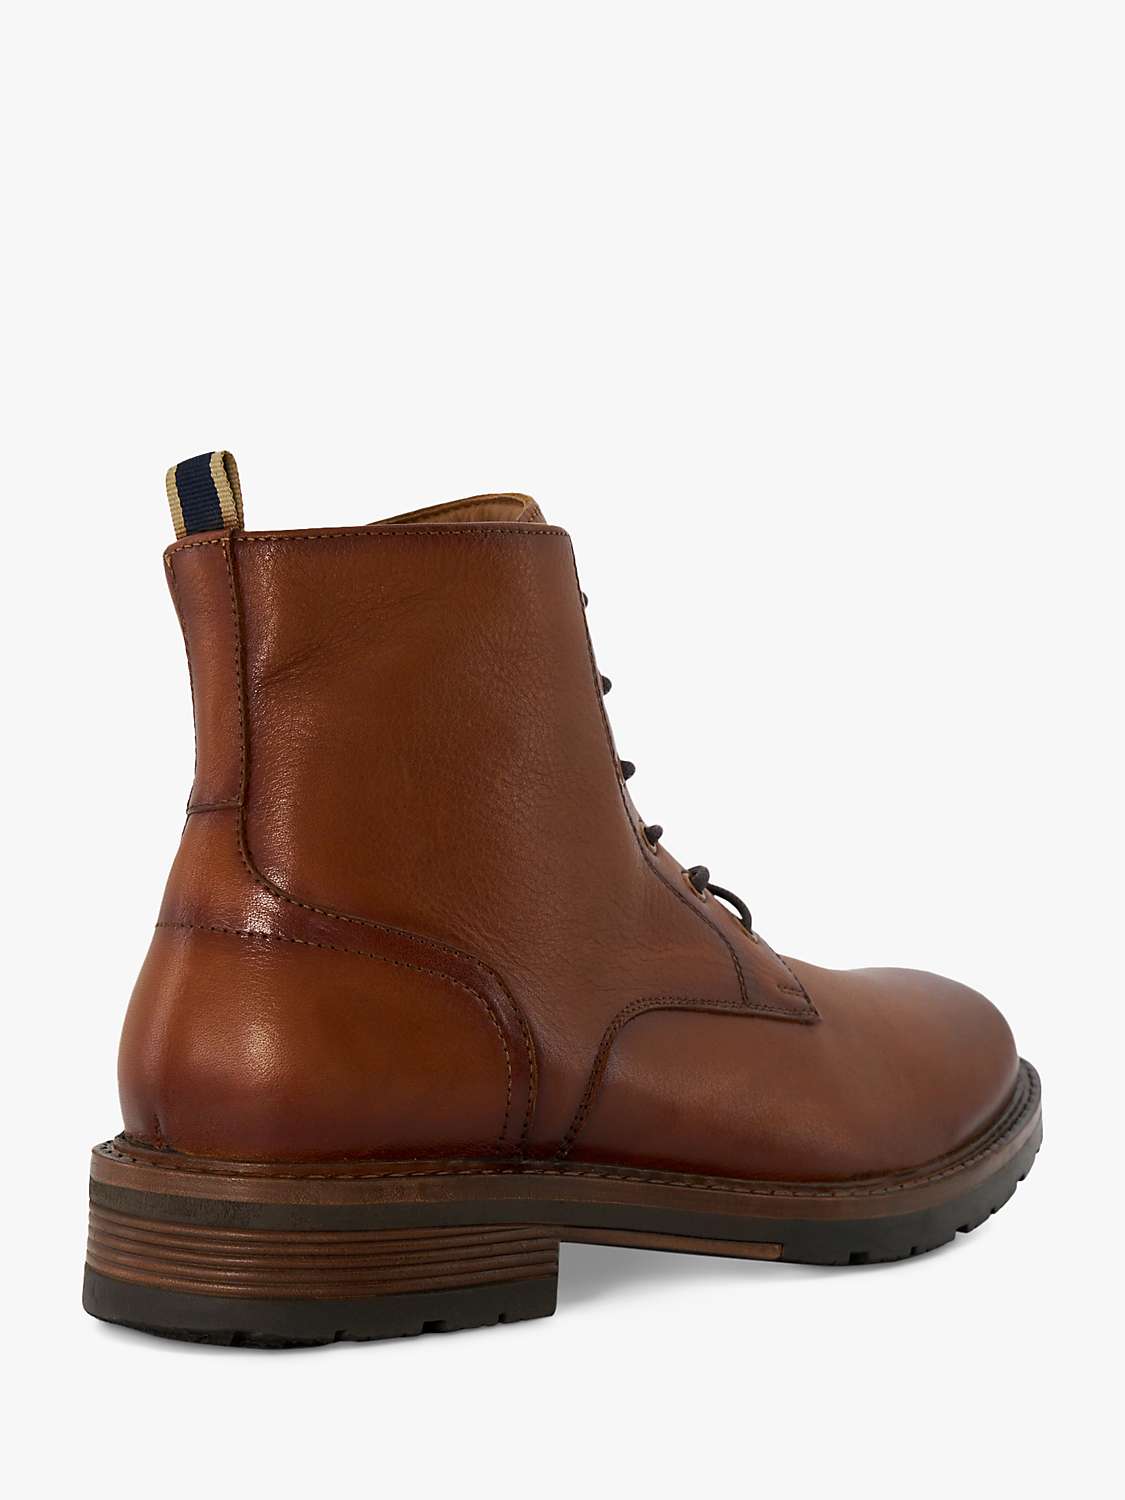 Buy Dune Cheshires Leather Boots, Tan Online at johnlewis.com